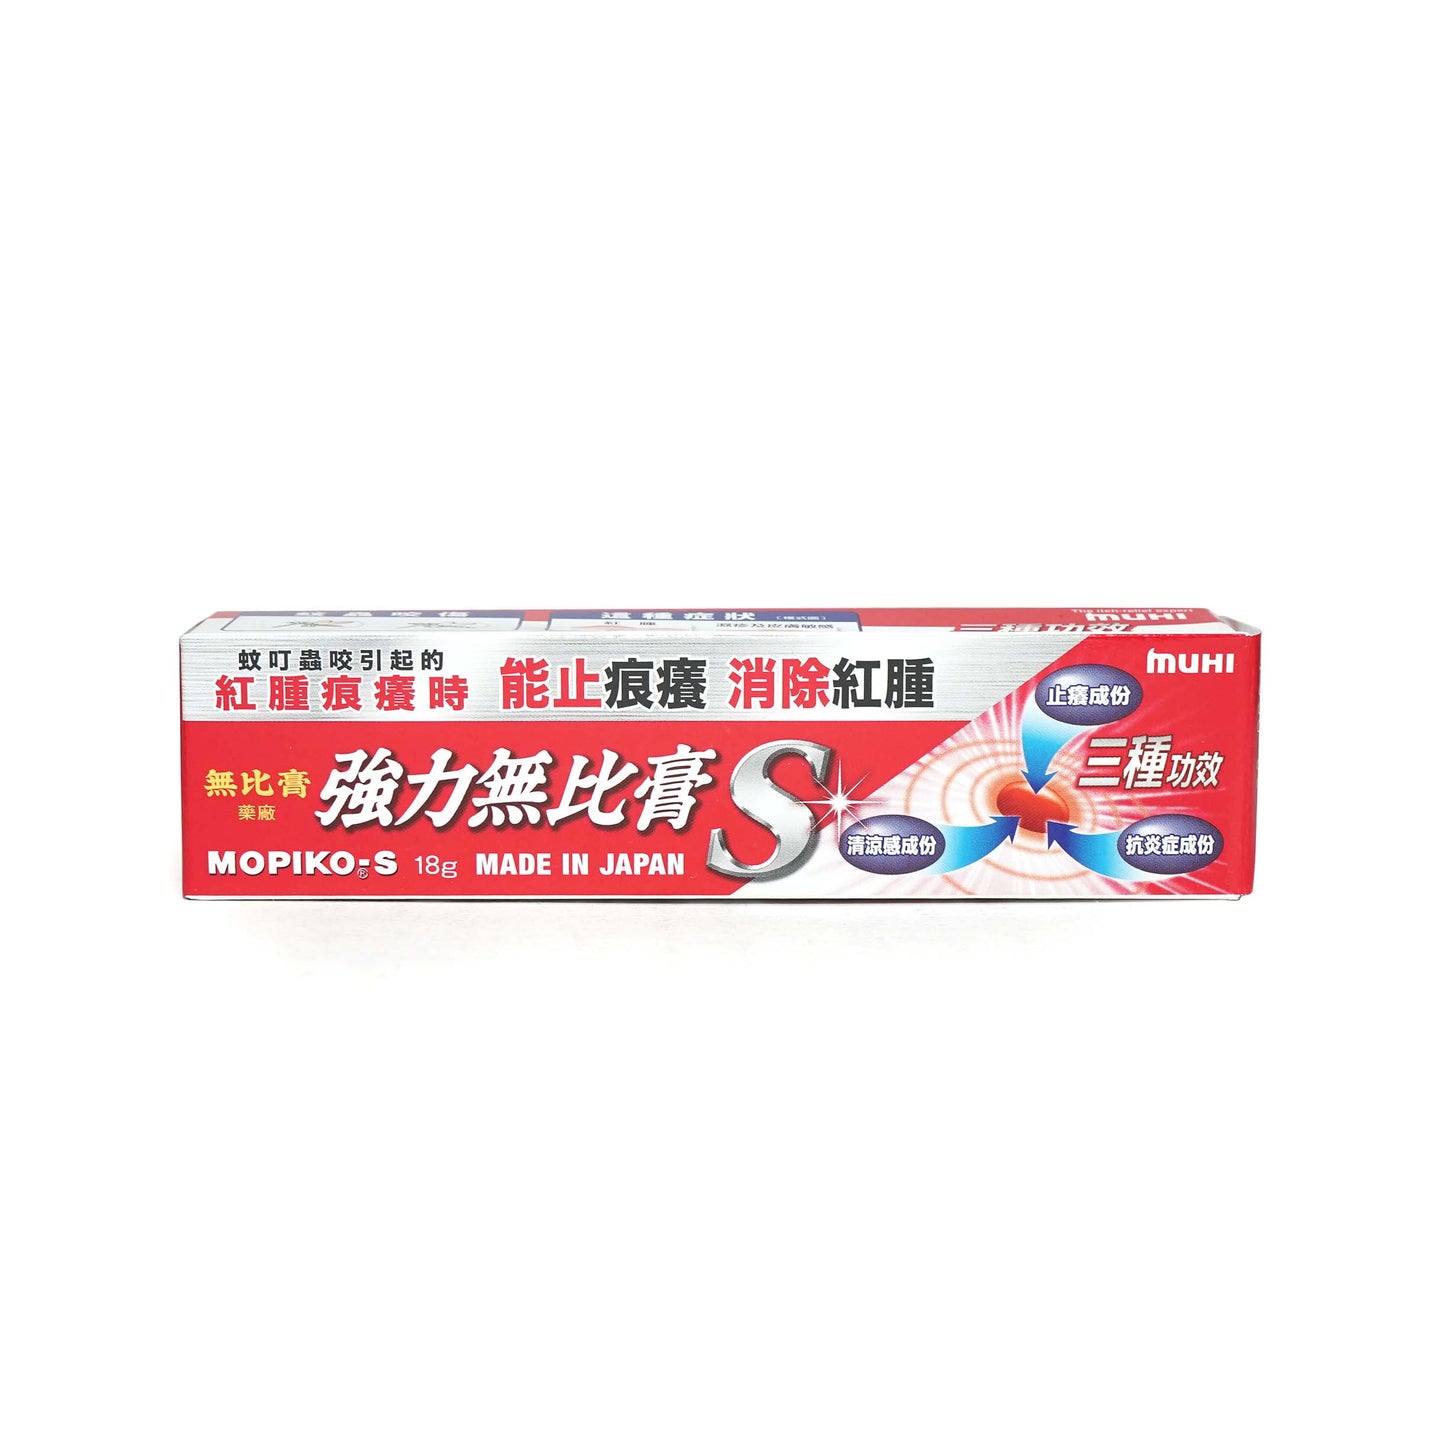 Mopiko S Ointment 強力無比膏